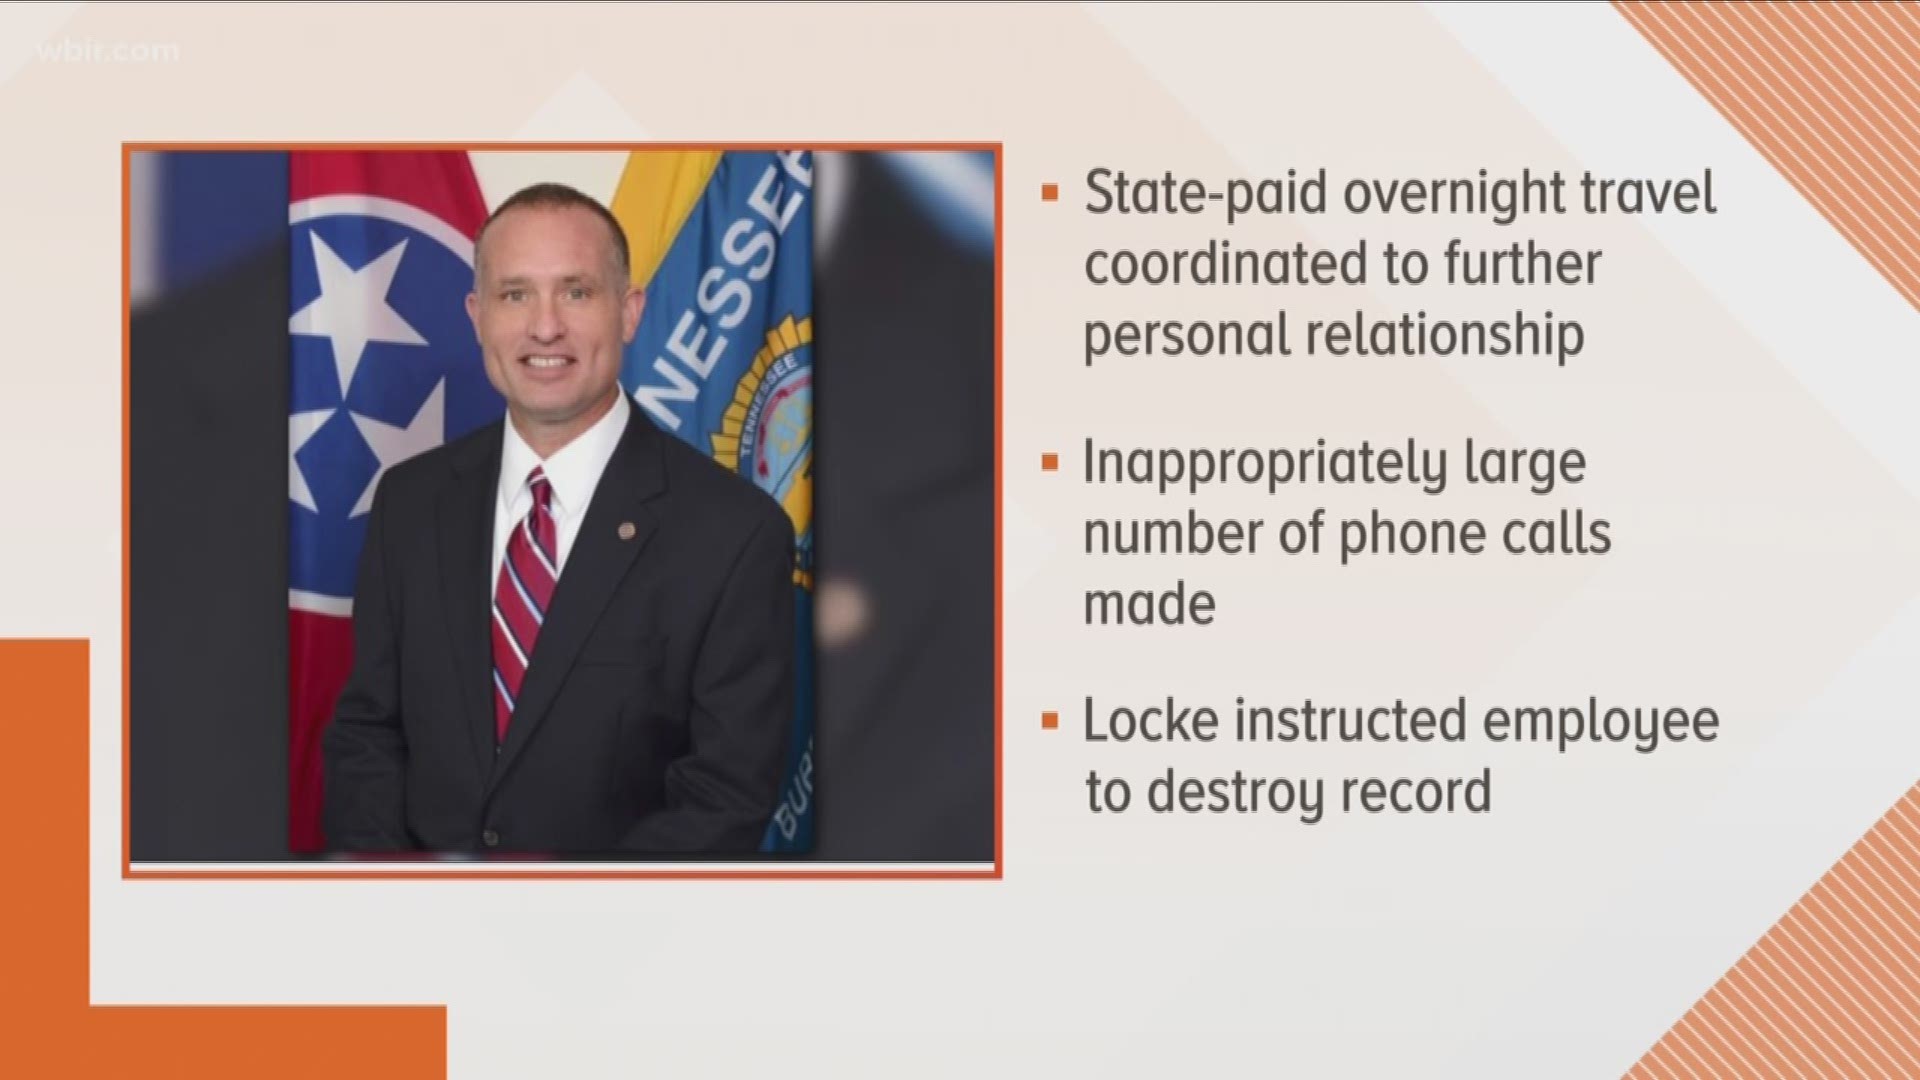 The Tennessee Comptroller's Office is now revealing its findings into the affair between the former TBI acting director and another state employee.